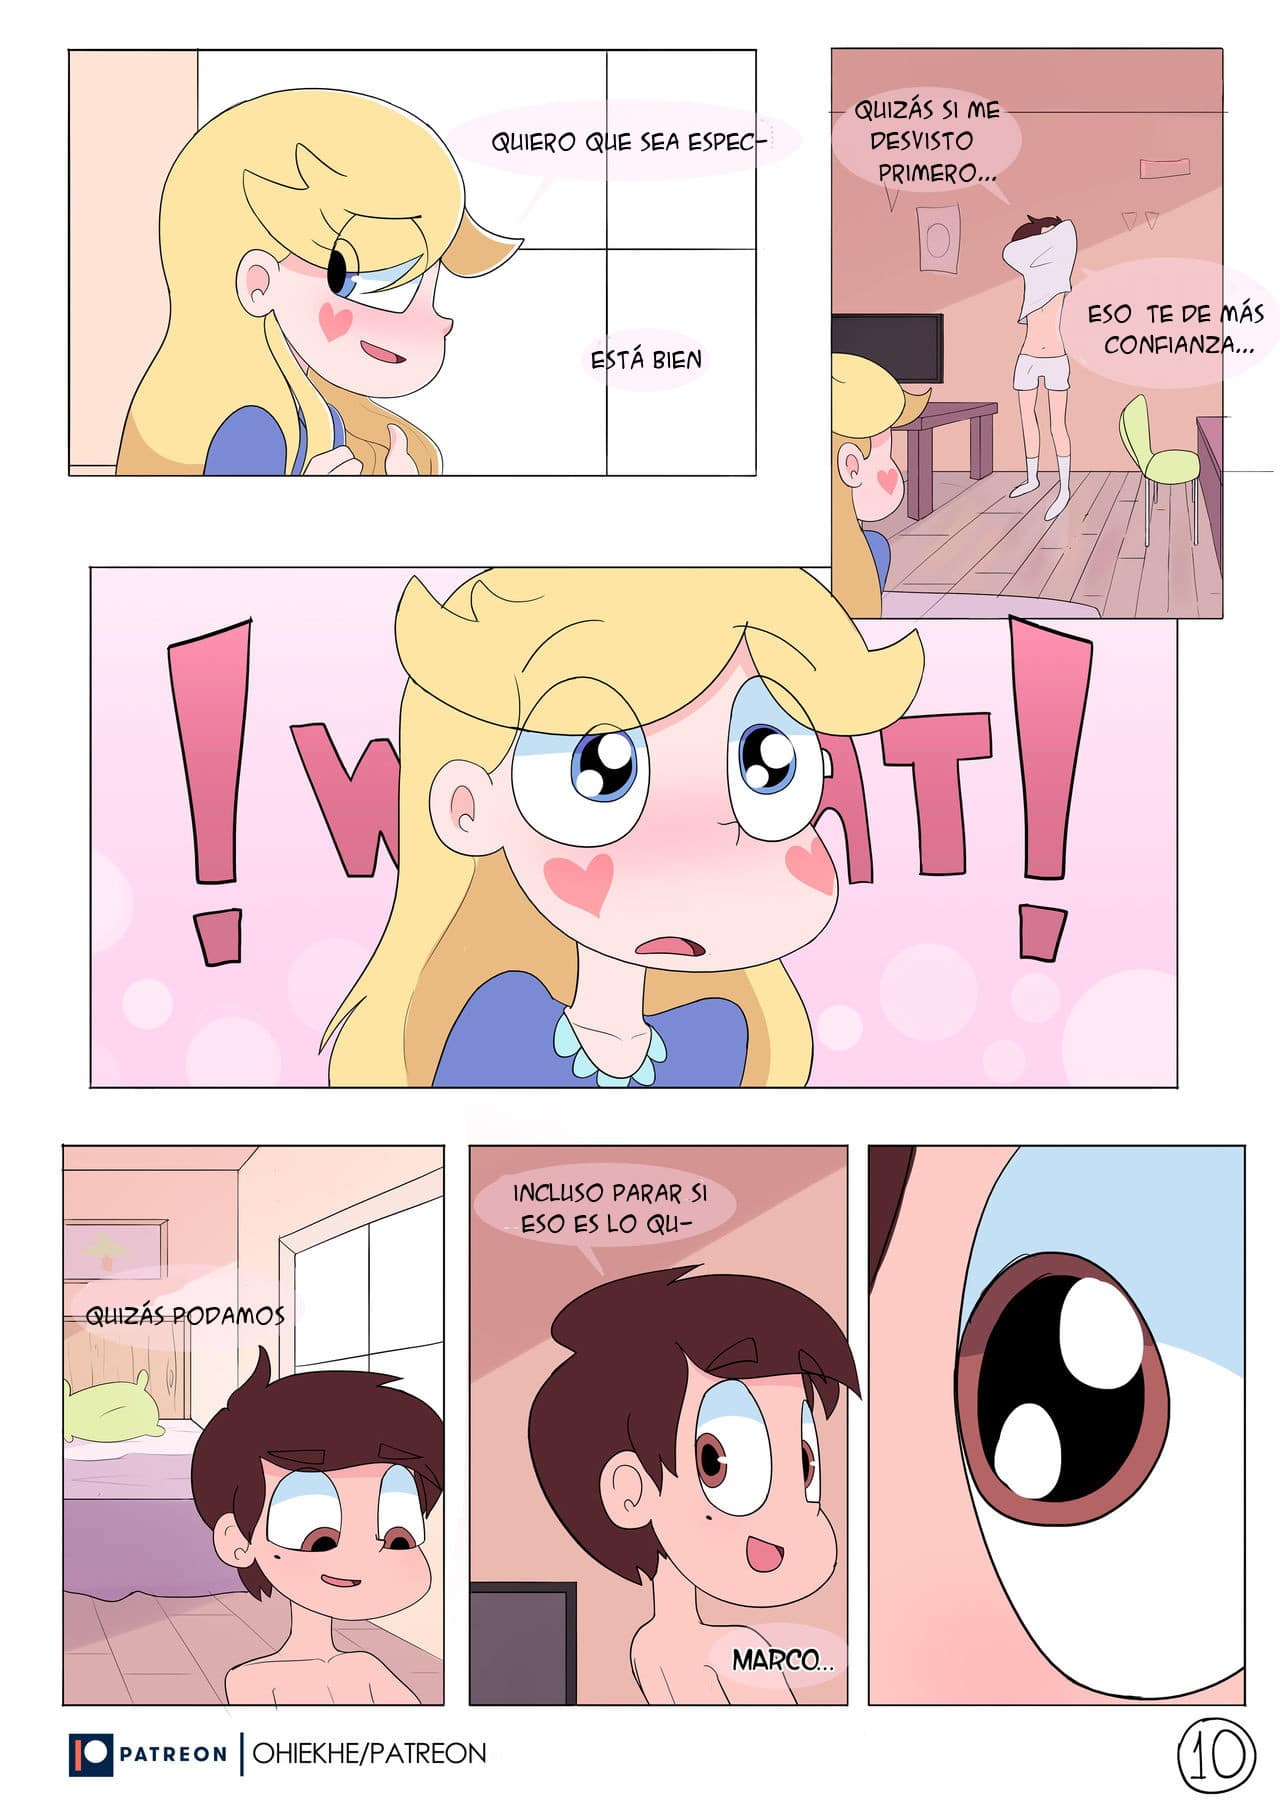 Time Alone – Star vs the Forces of Evil - 11